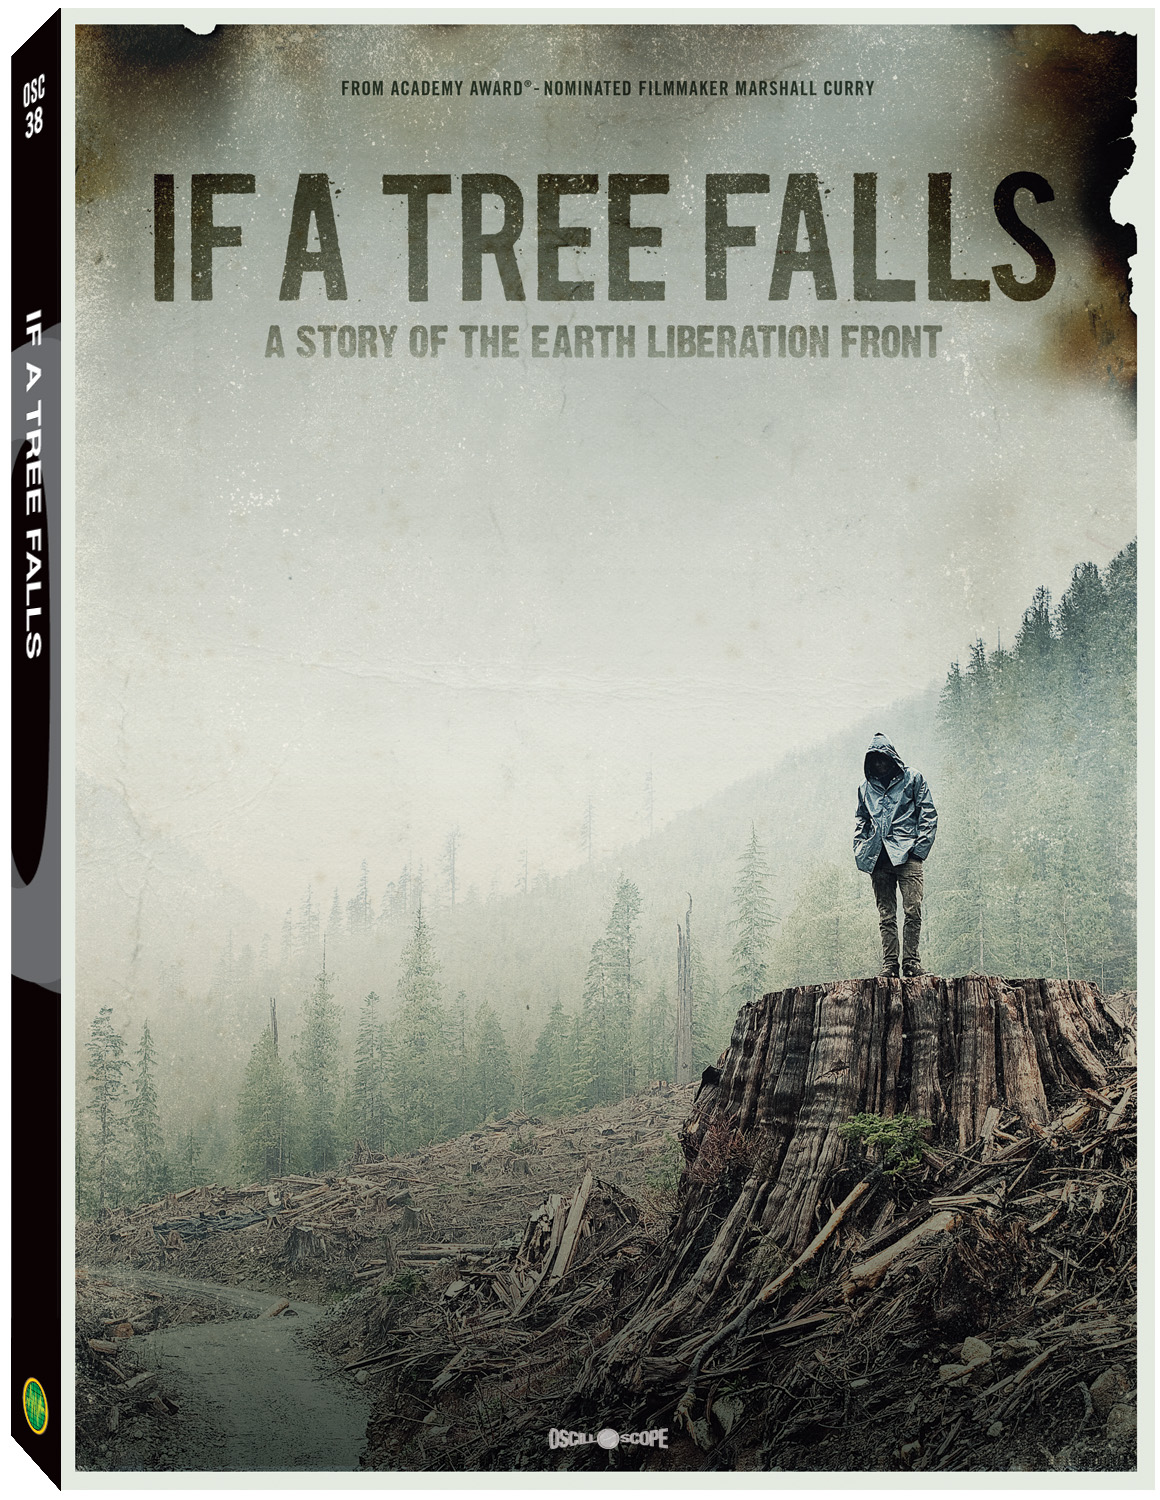 If A Tree Falls: A Story of the Earth Liberation Front